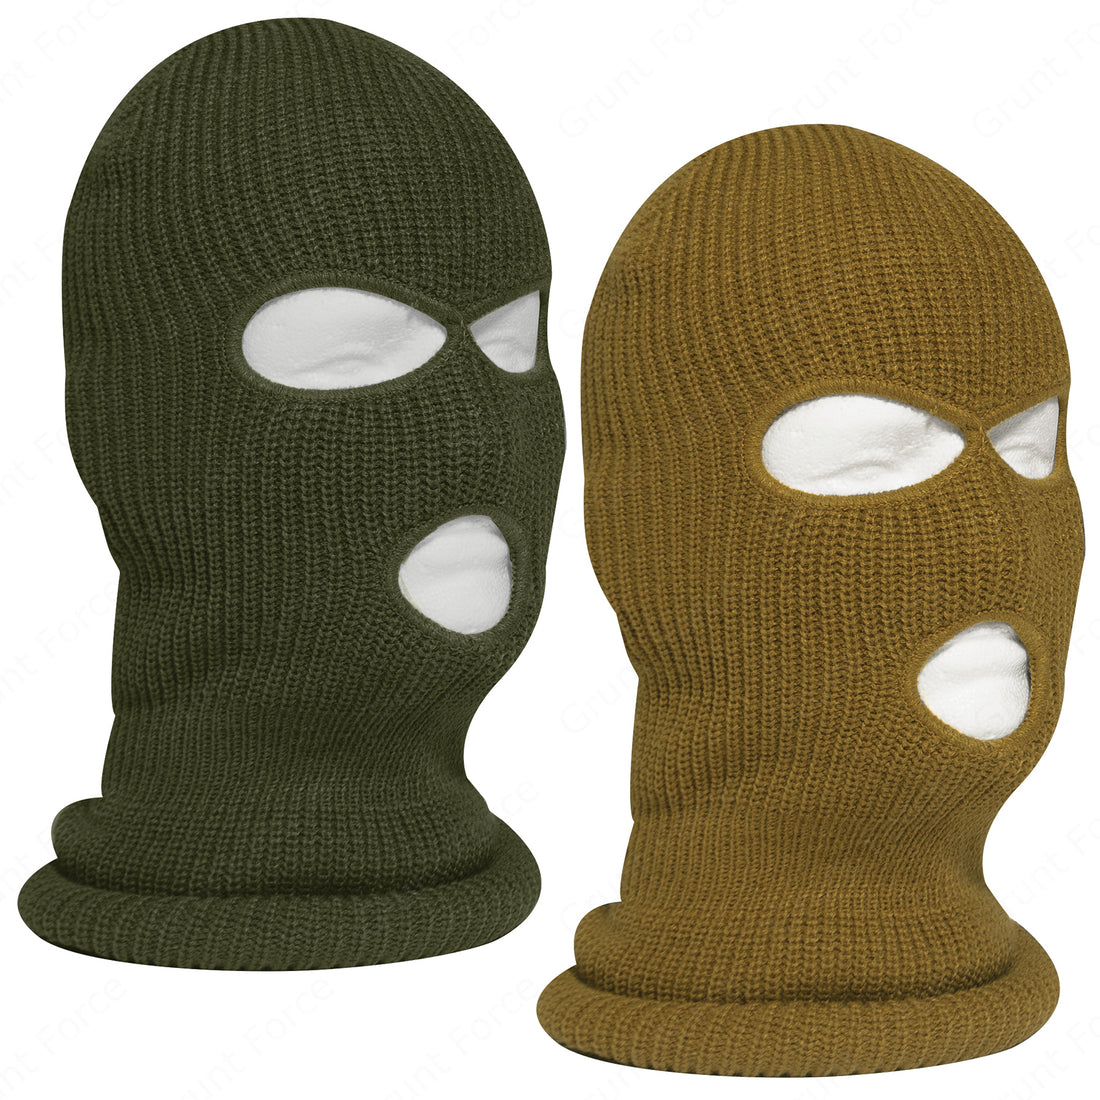 Rothco's Fine Knit Three Hole Facemask-The Ultimate Cold Weather Companion